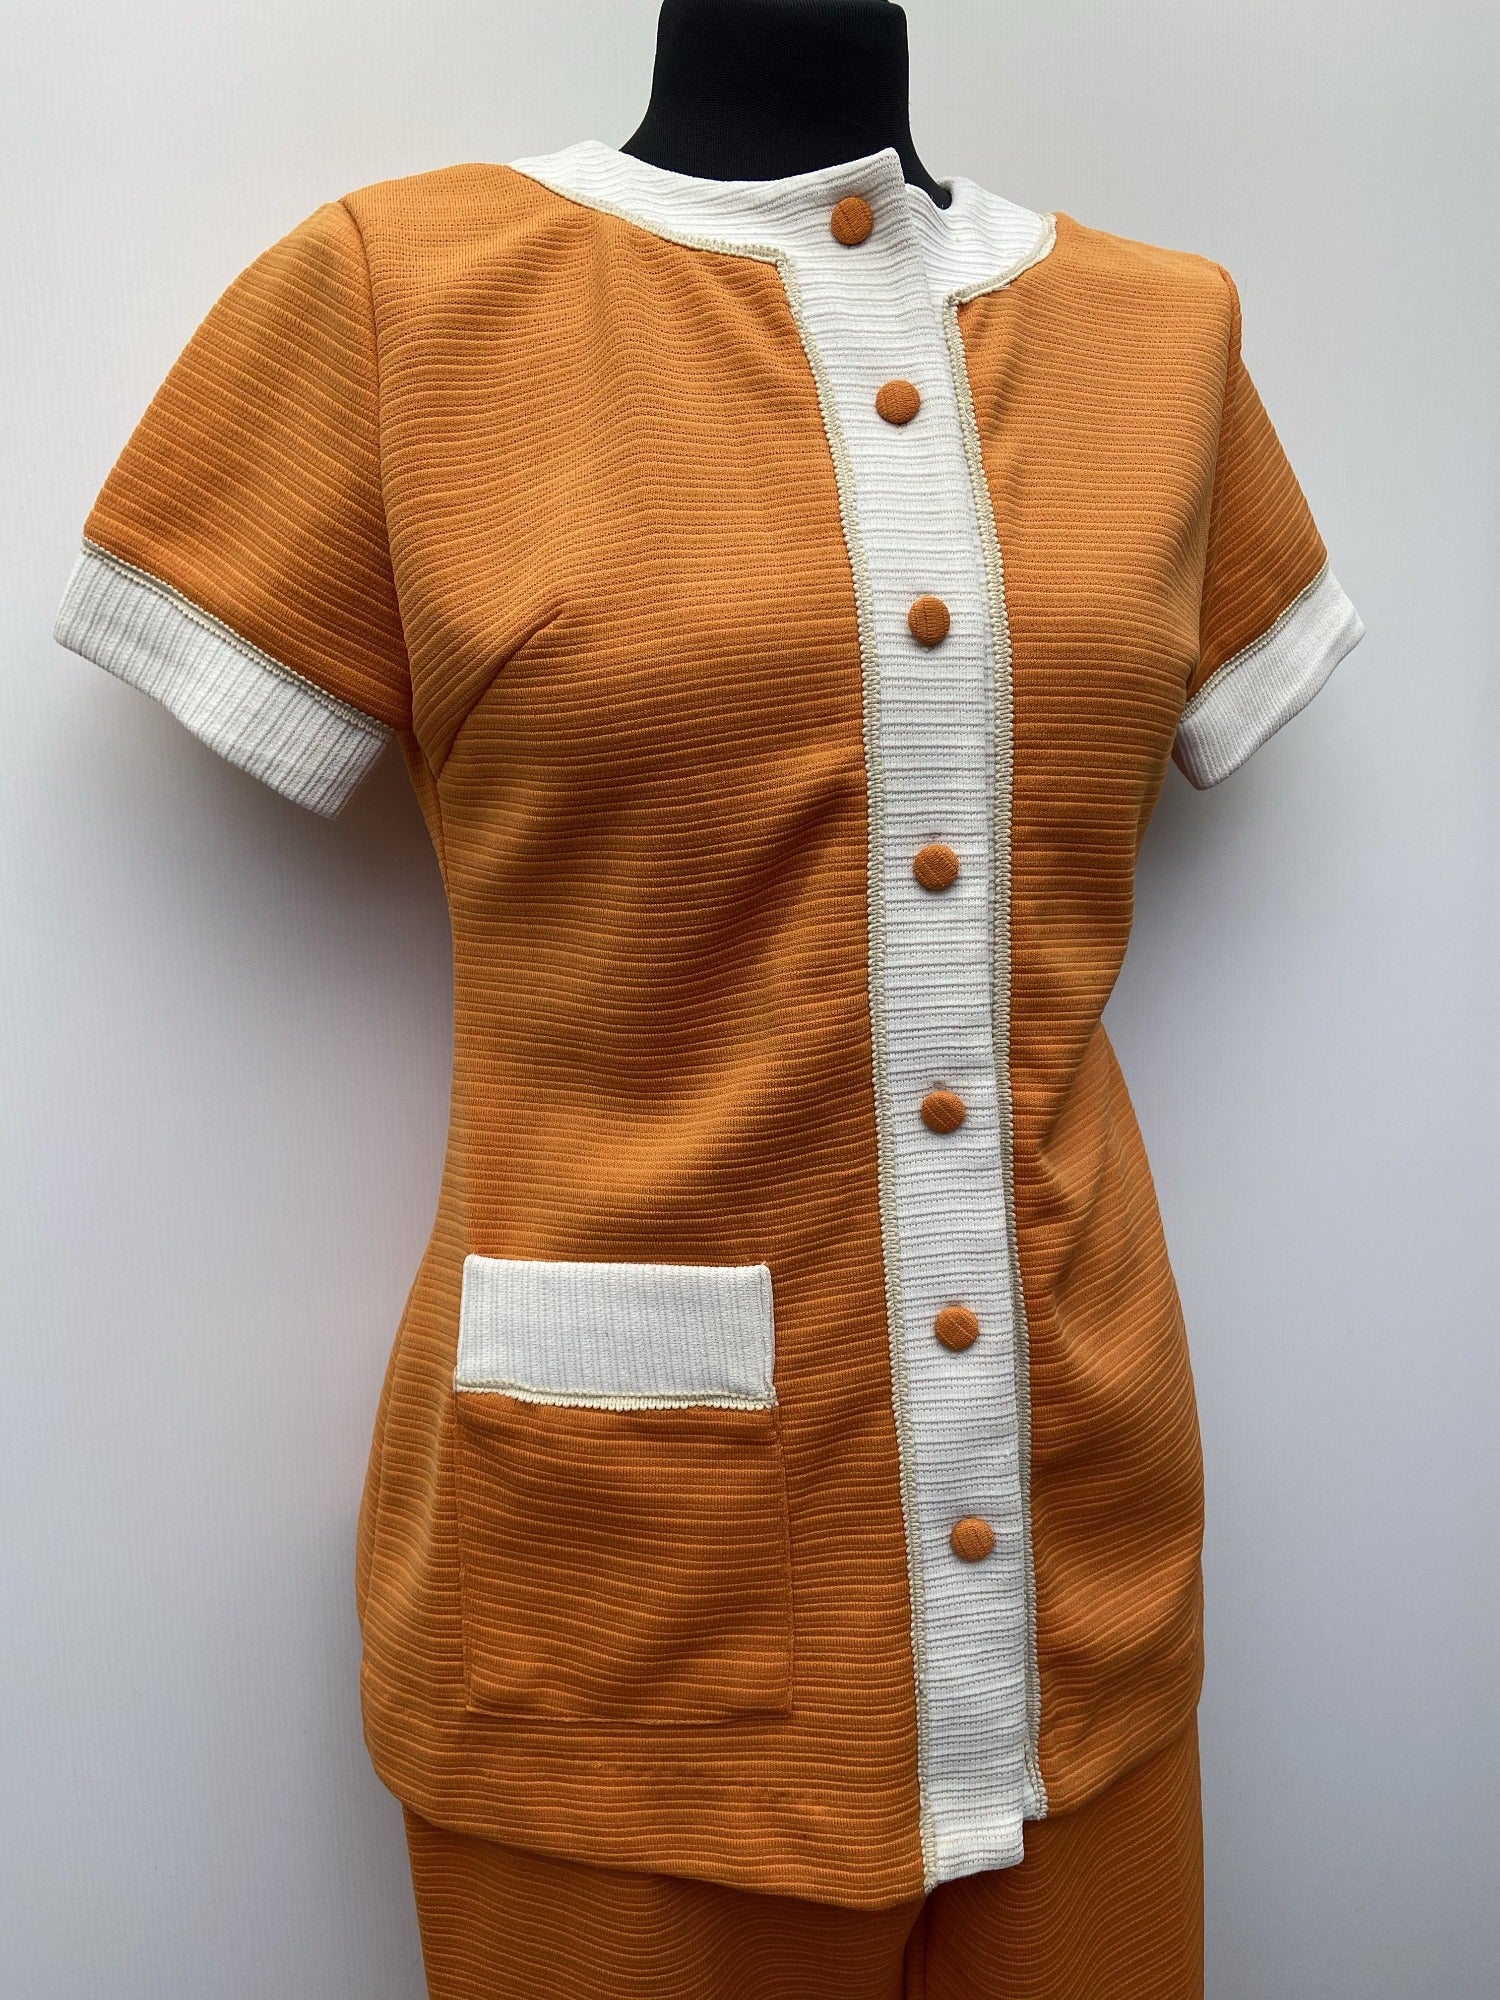 vintage 60s 1960s mod suit set trousers flared wide leg top tunic short sleeved orange white rare urban village womens clothing